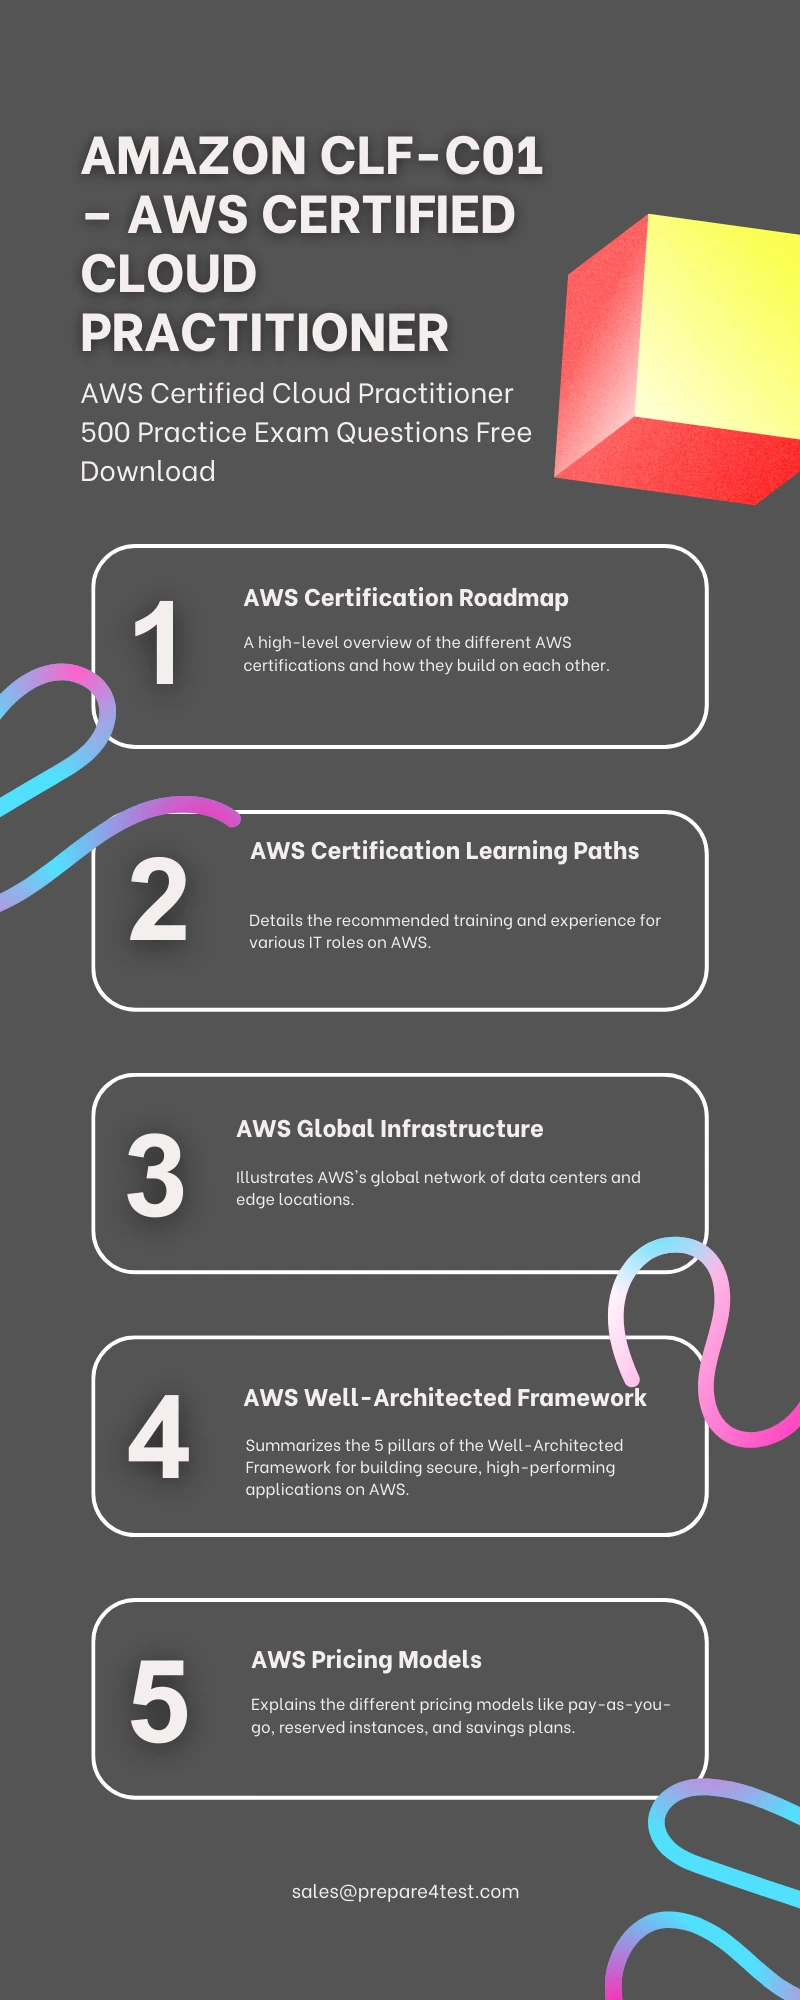 AWS Certified Cloud Practitioner 500 Practice Exam Questions Free Download Infographic